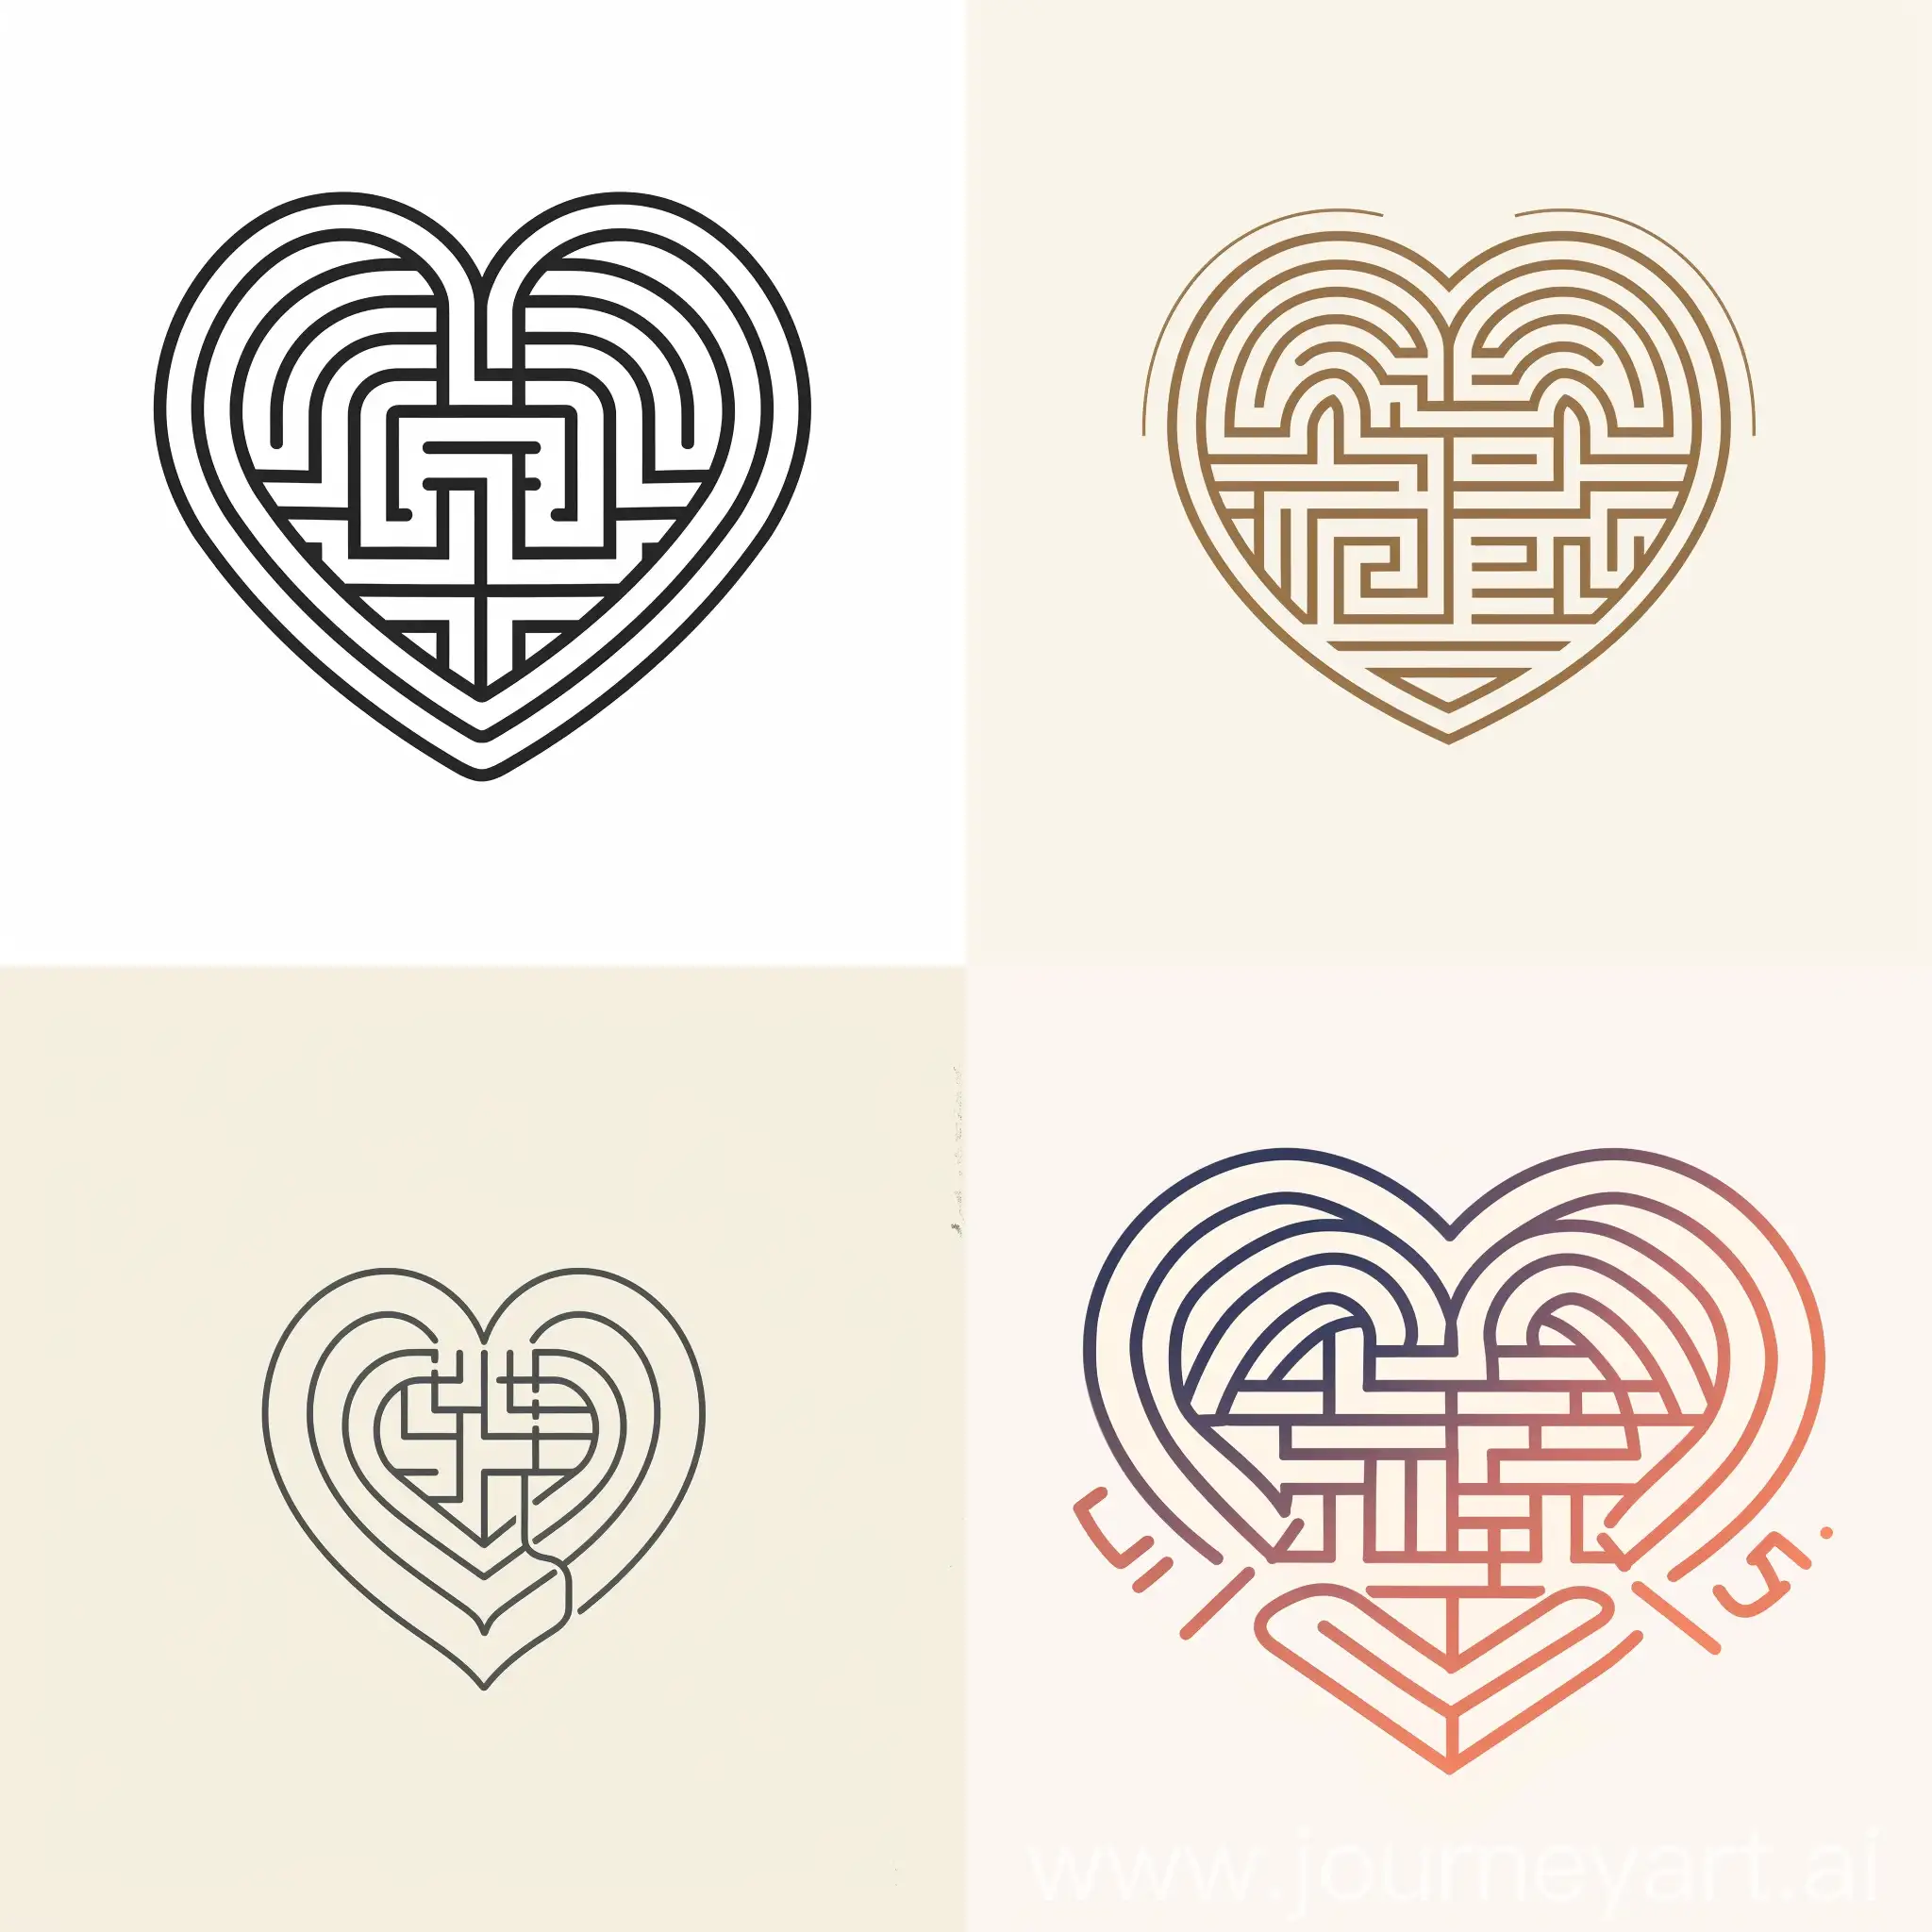 Help me make a sign, this needs to have a love element. There is a simple maze inside the heart, and the exit of the maze is on the outer edge of the heart. The background color is white, the logo is composed of lines, and the overall style needs to be warm and have the feeling of being cared for.
